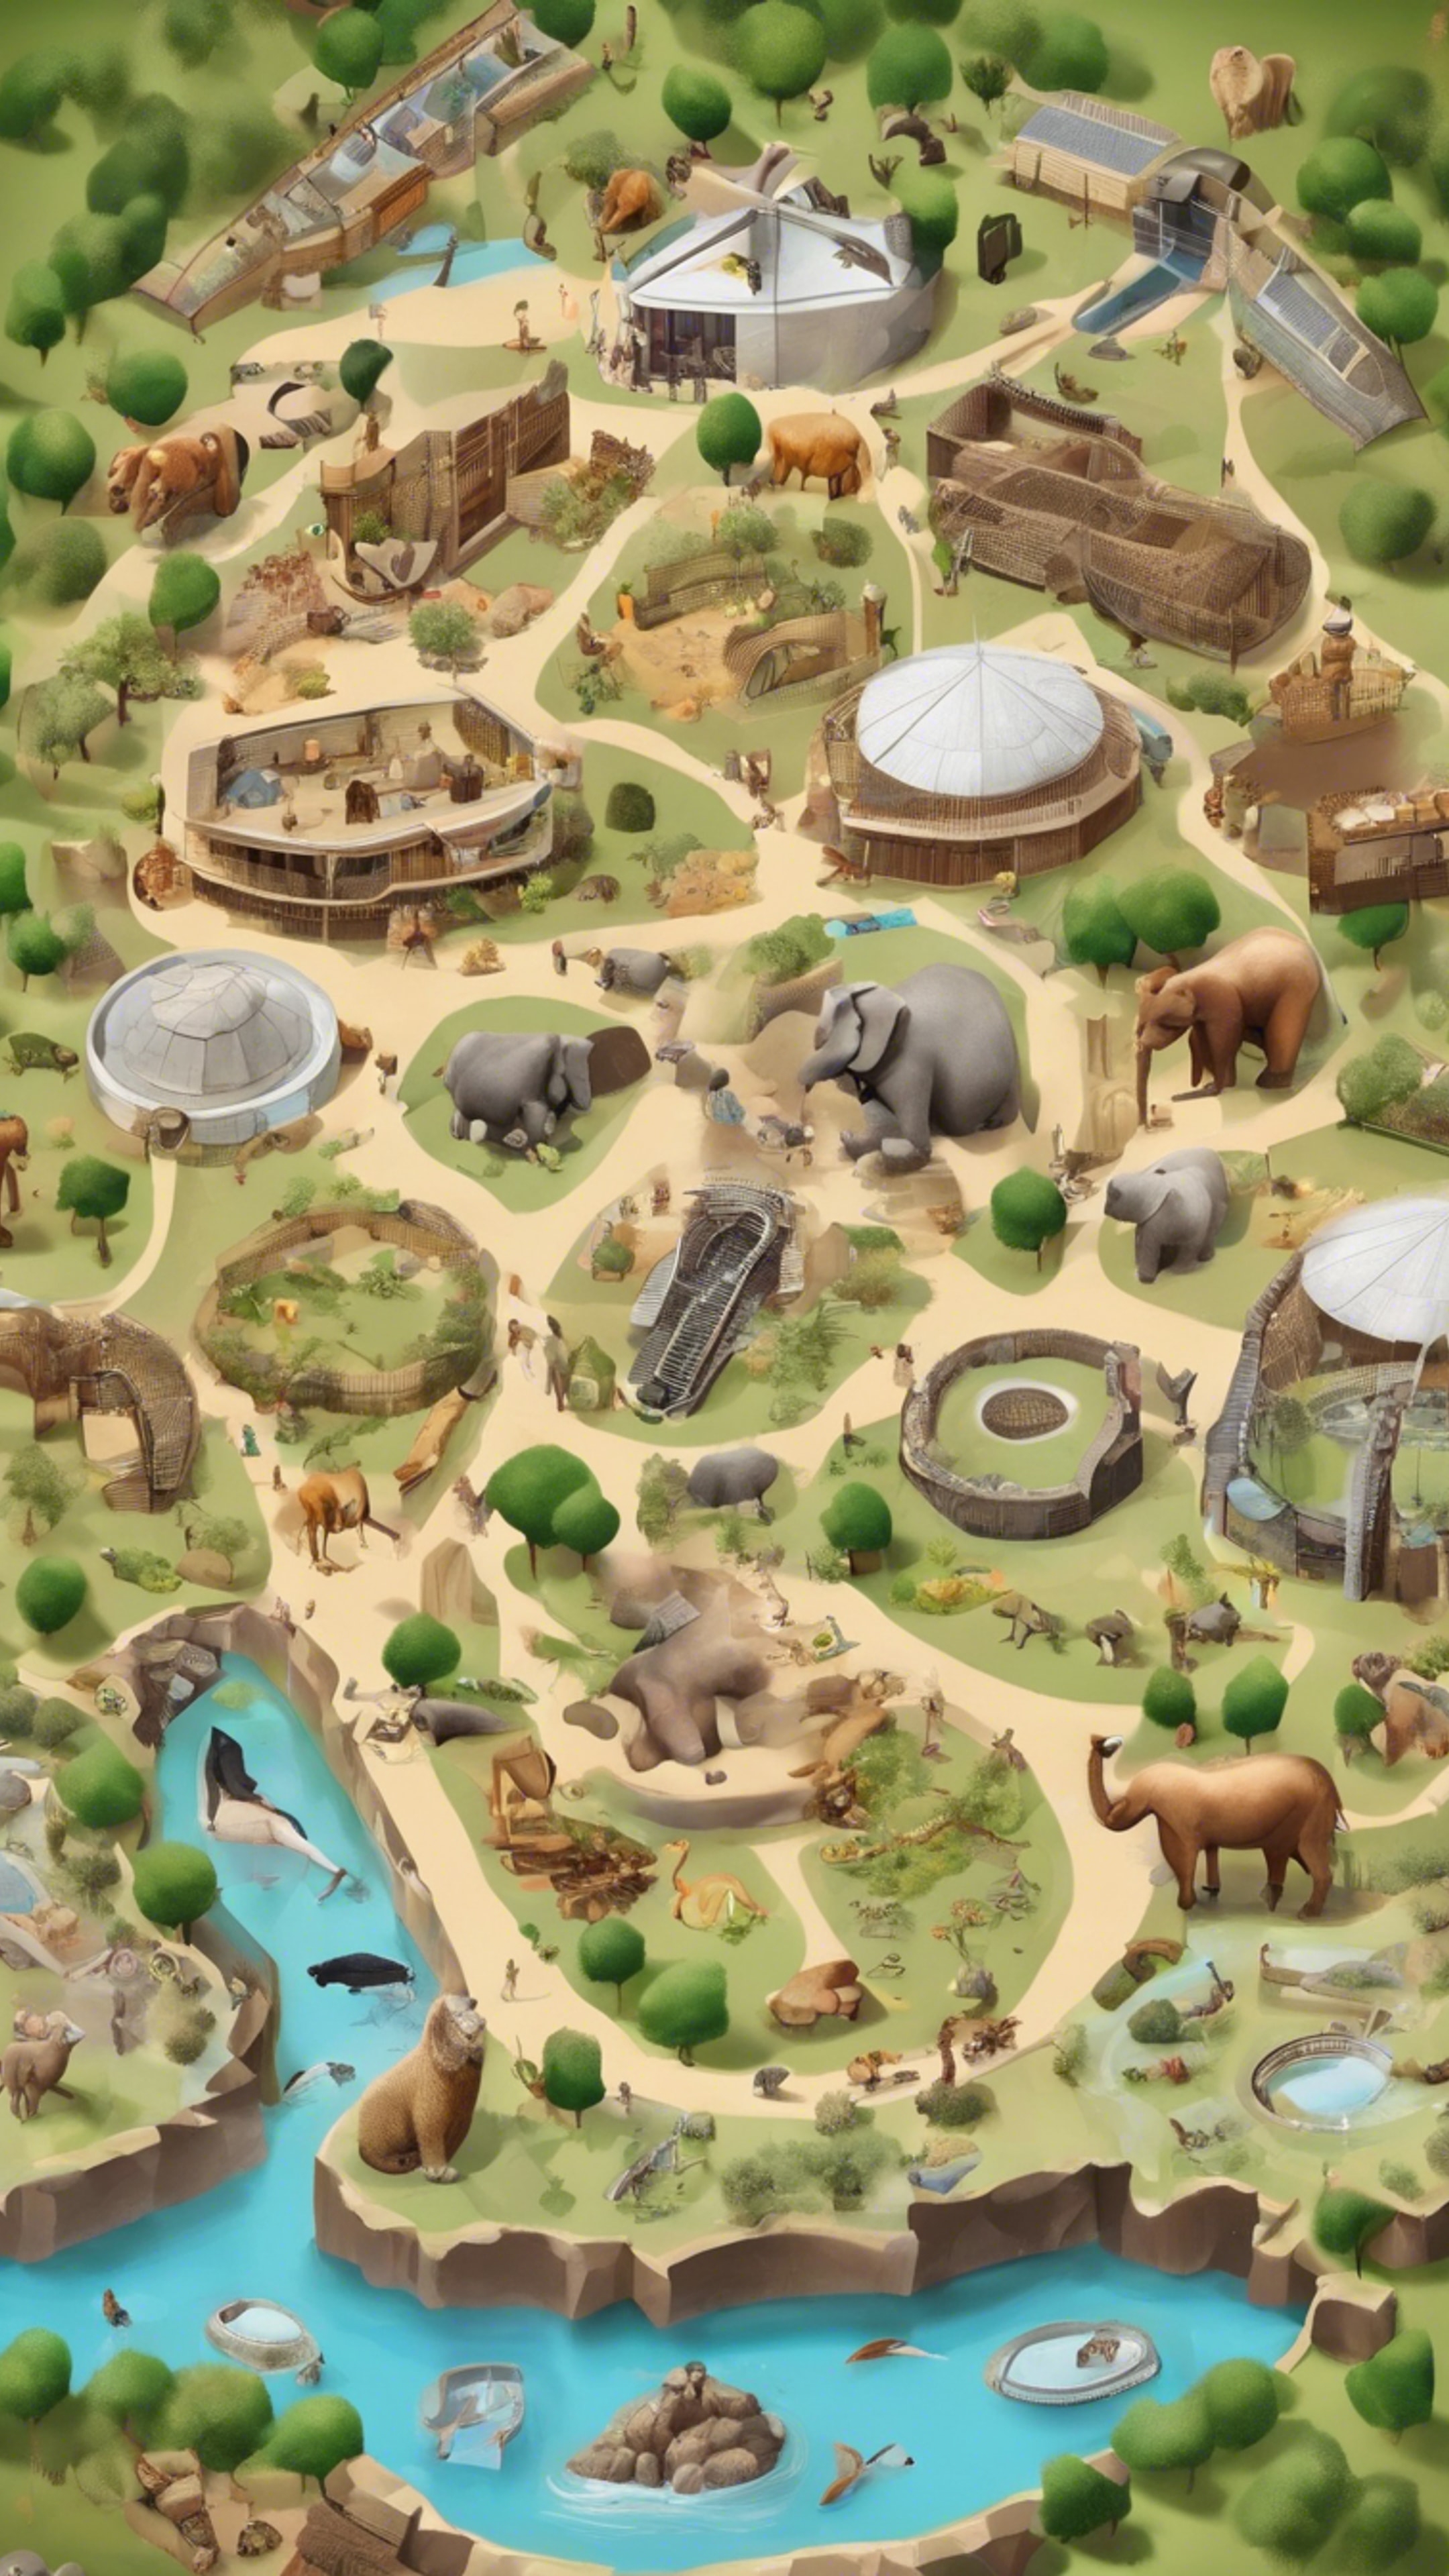 A graphic map of a zoo, with different animal enclosures, food stalls and amenities. Валлпапер[7d3ed7eed3f244f7a17f]